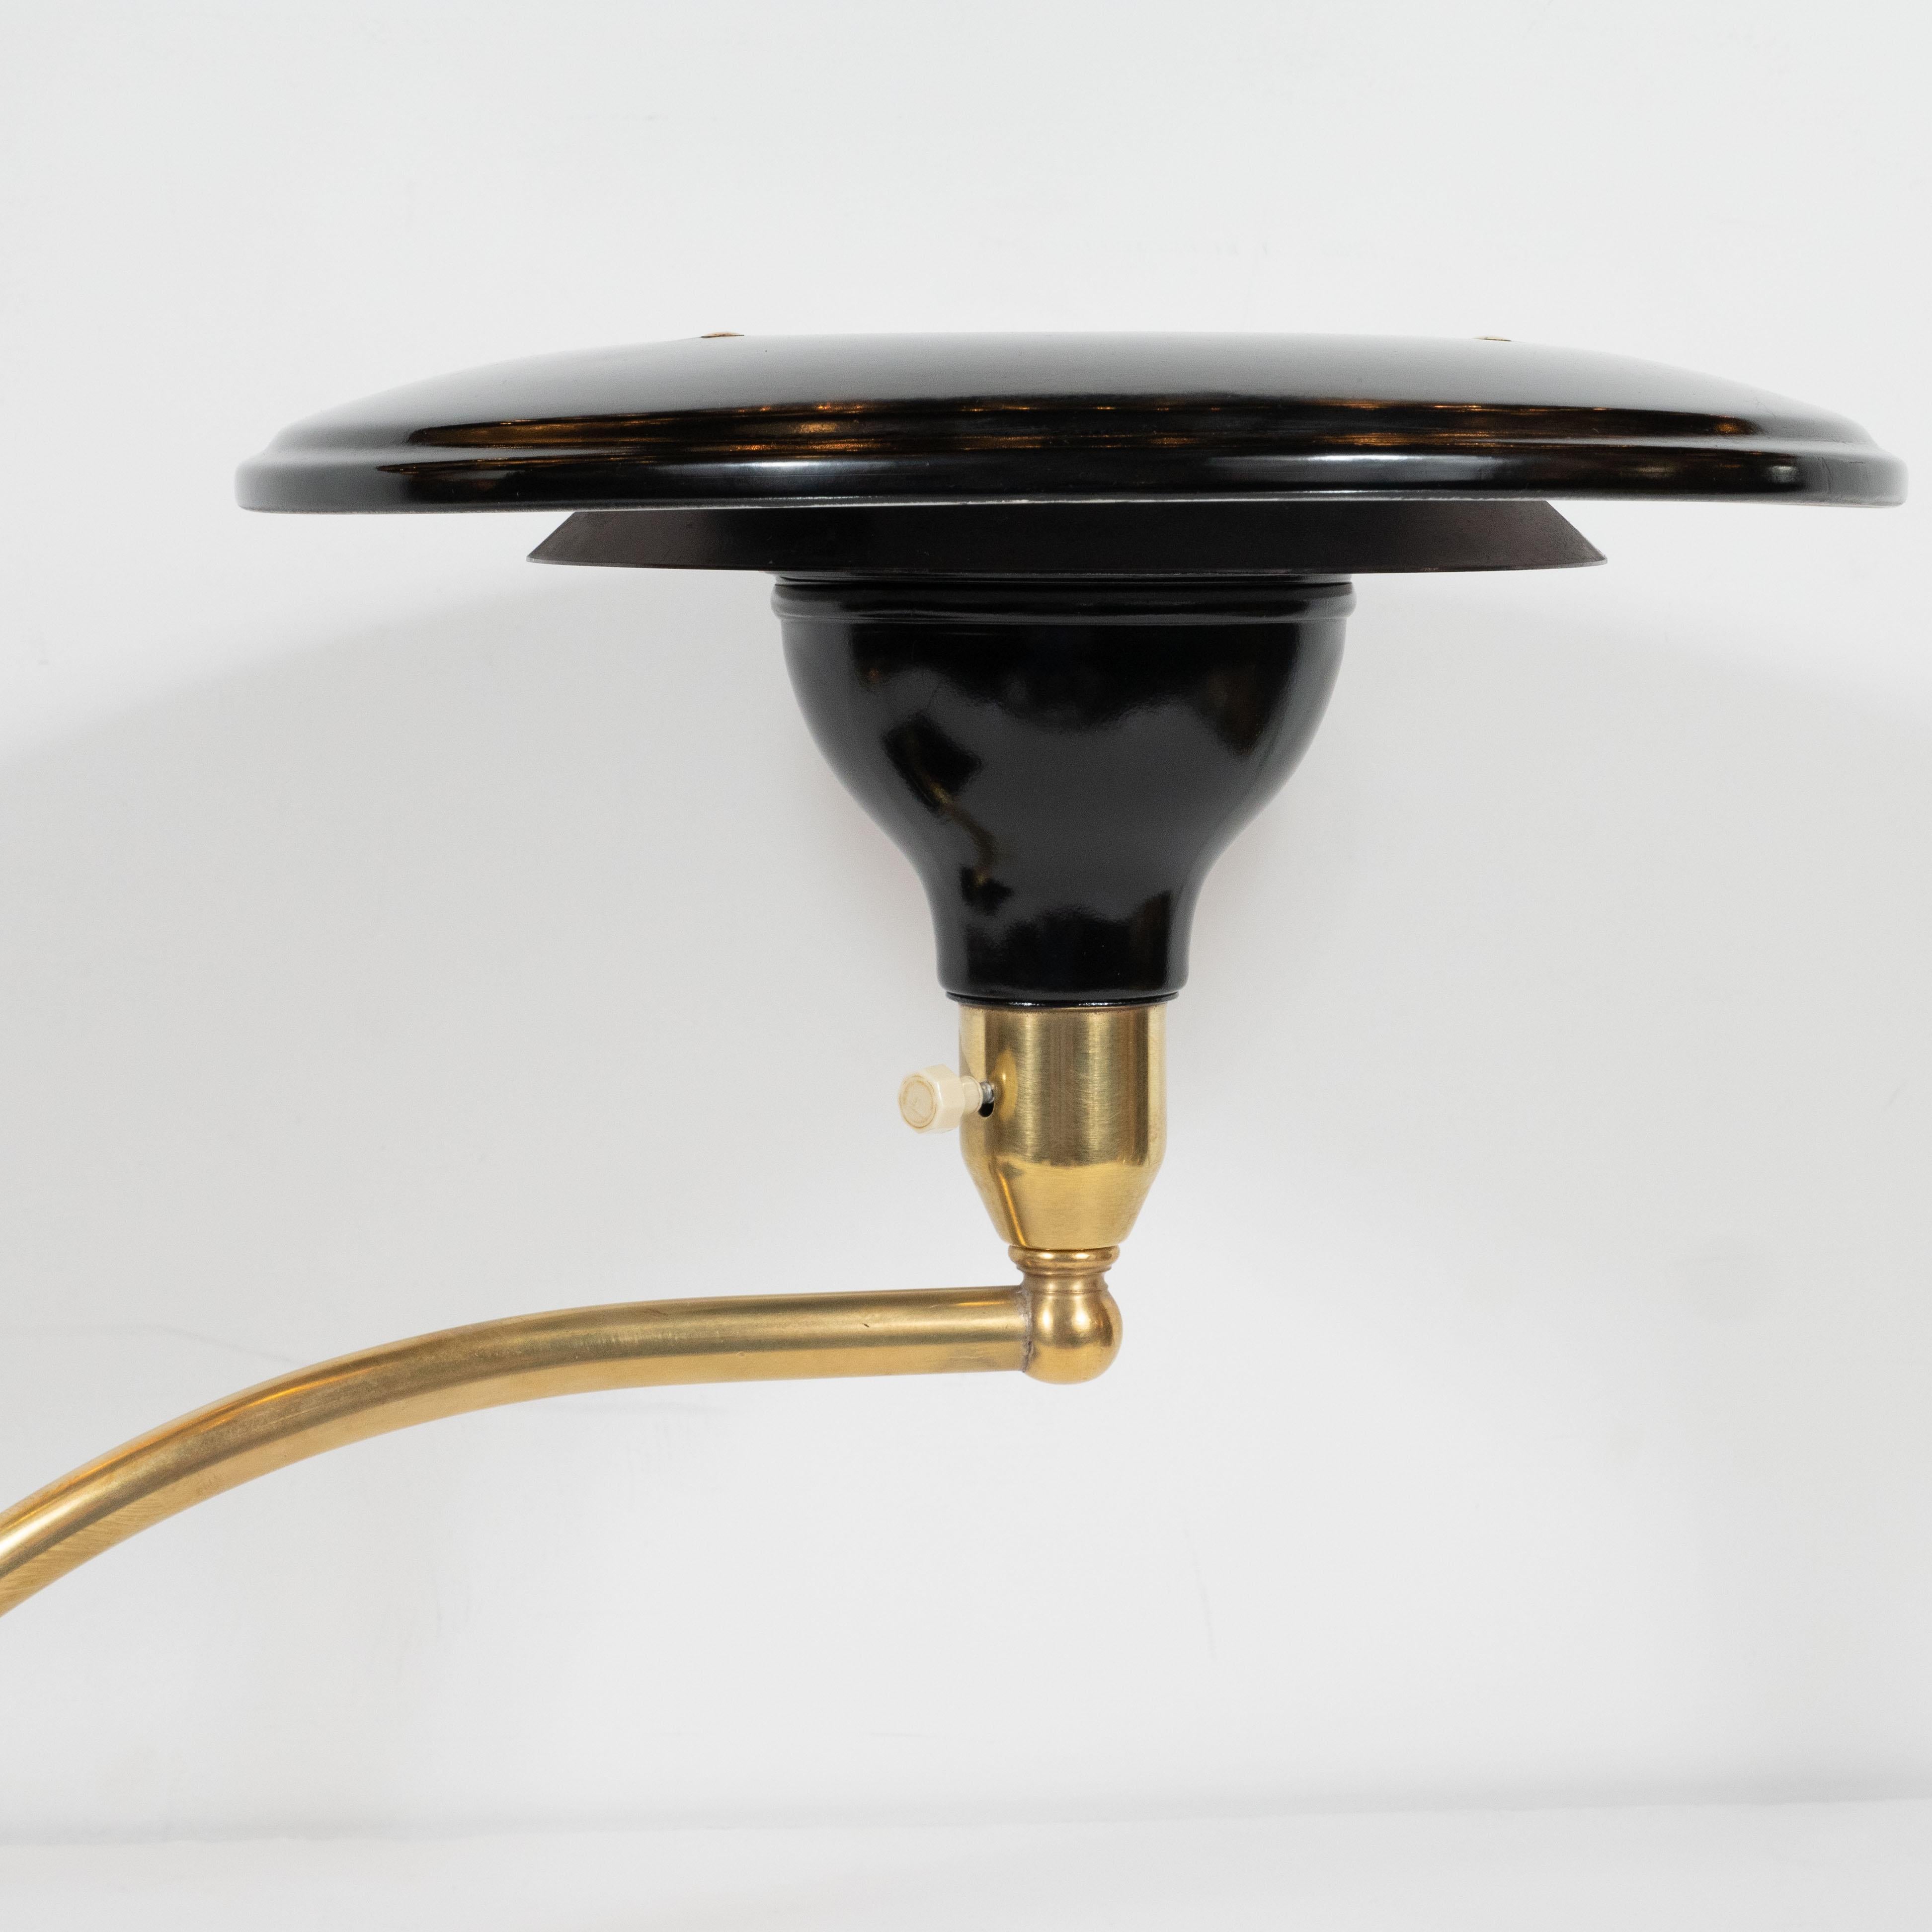 This elegant Art Deco Machine Age table lamp was realized in the United States, circa 1935. It features a rectangular black enamel base plate topped with a spherical brass embellishment. A curved arm extends outwards culminating in a conical brass